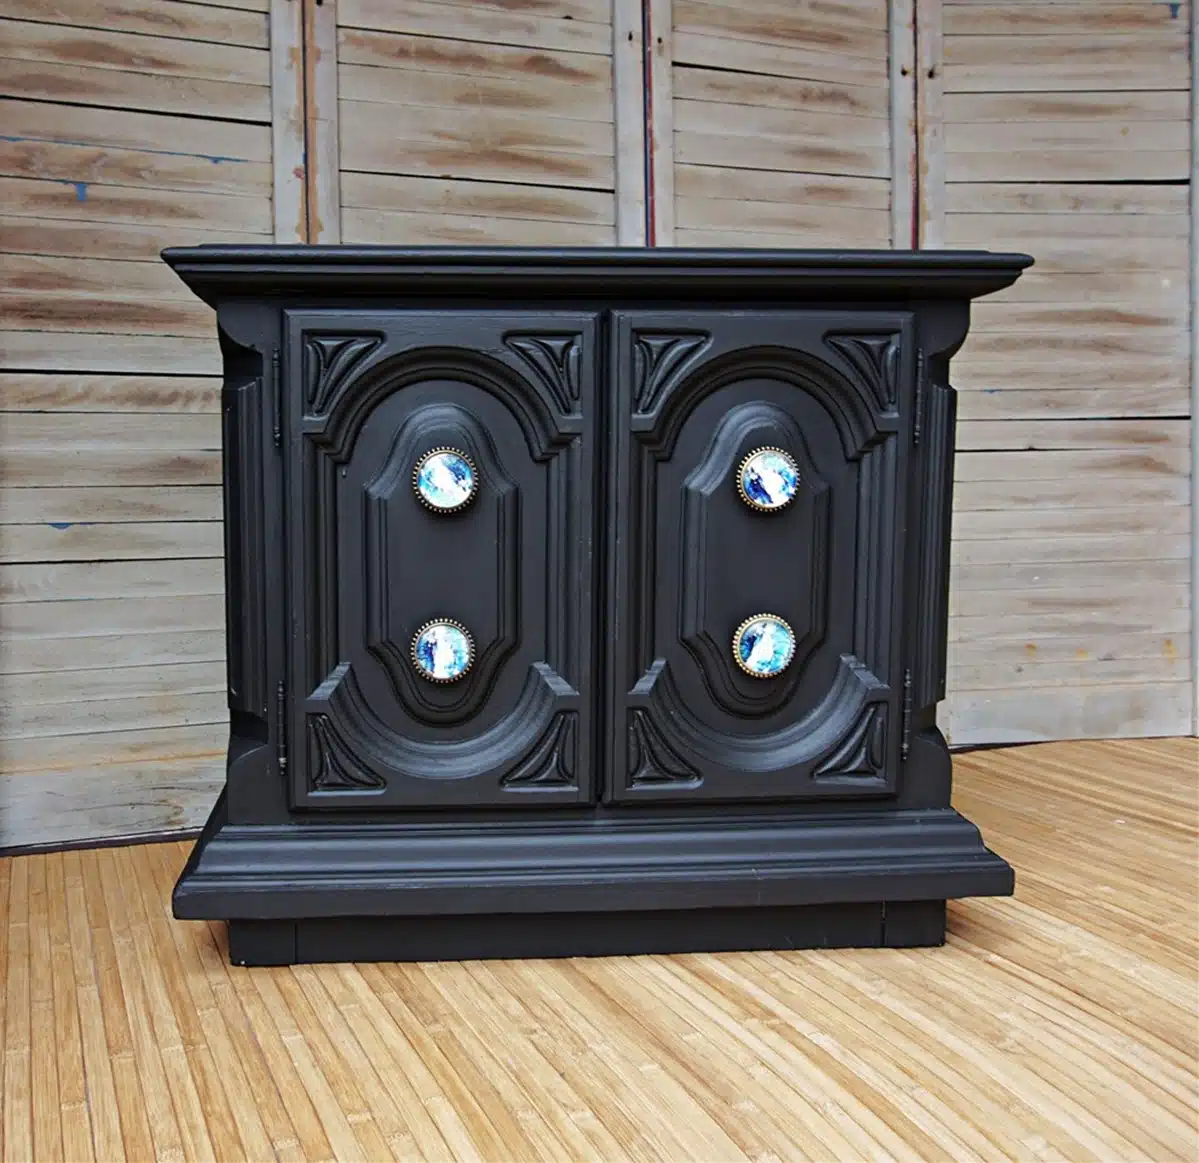 paint a table with black paint and add new knobs